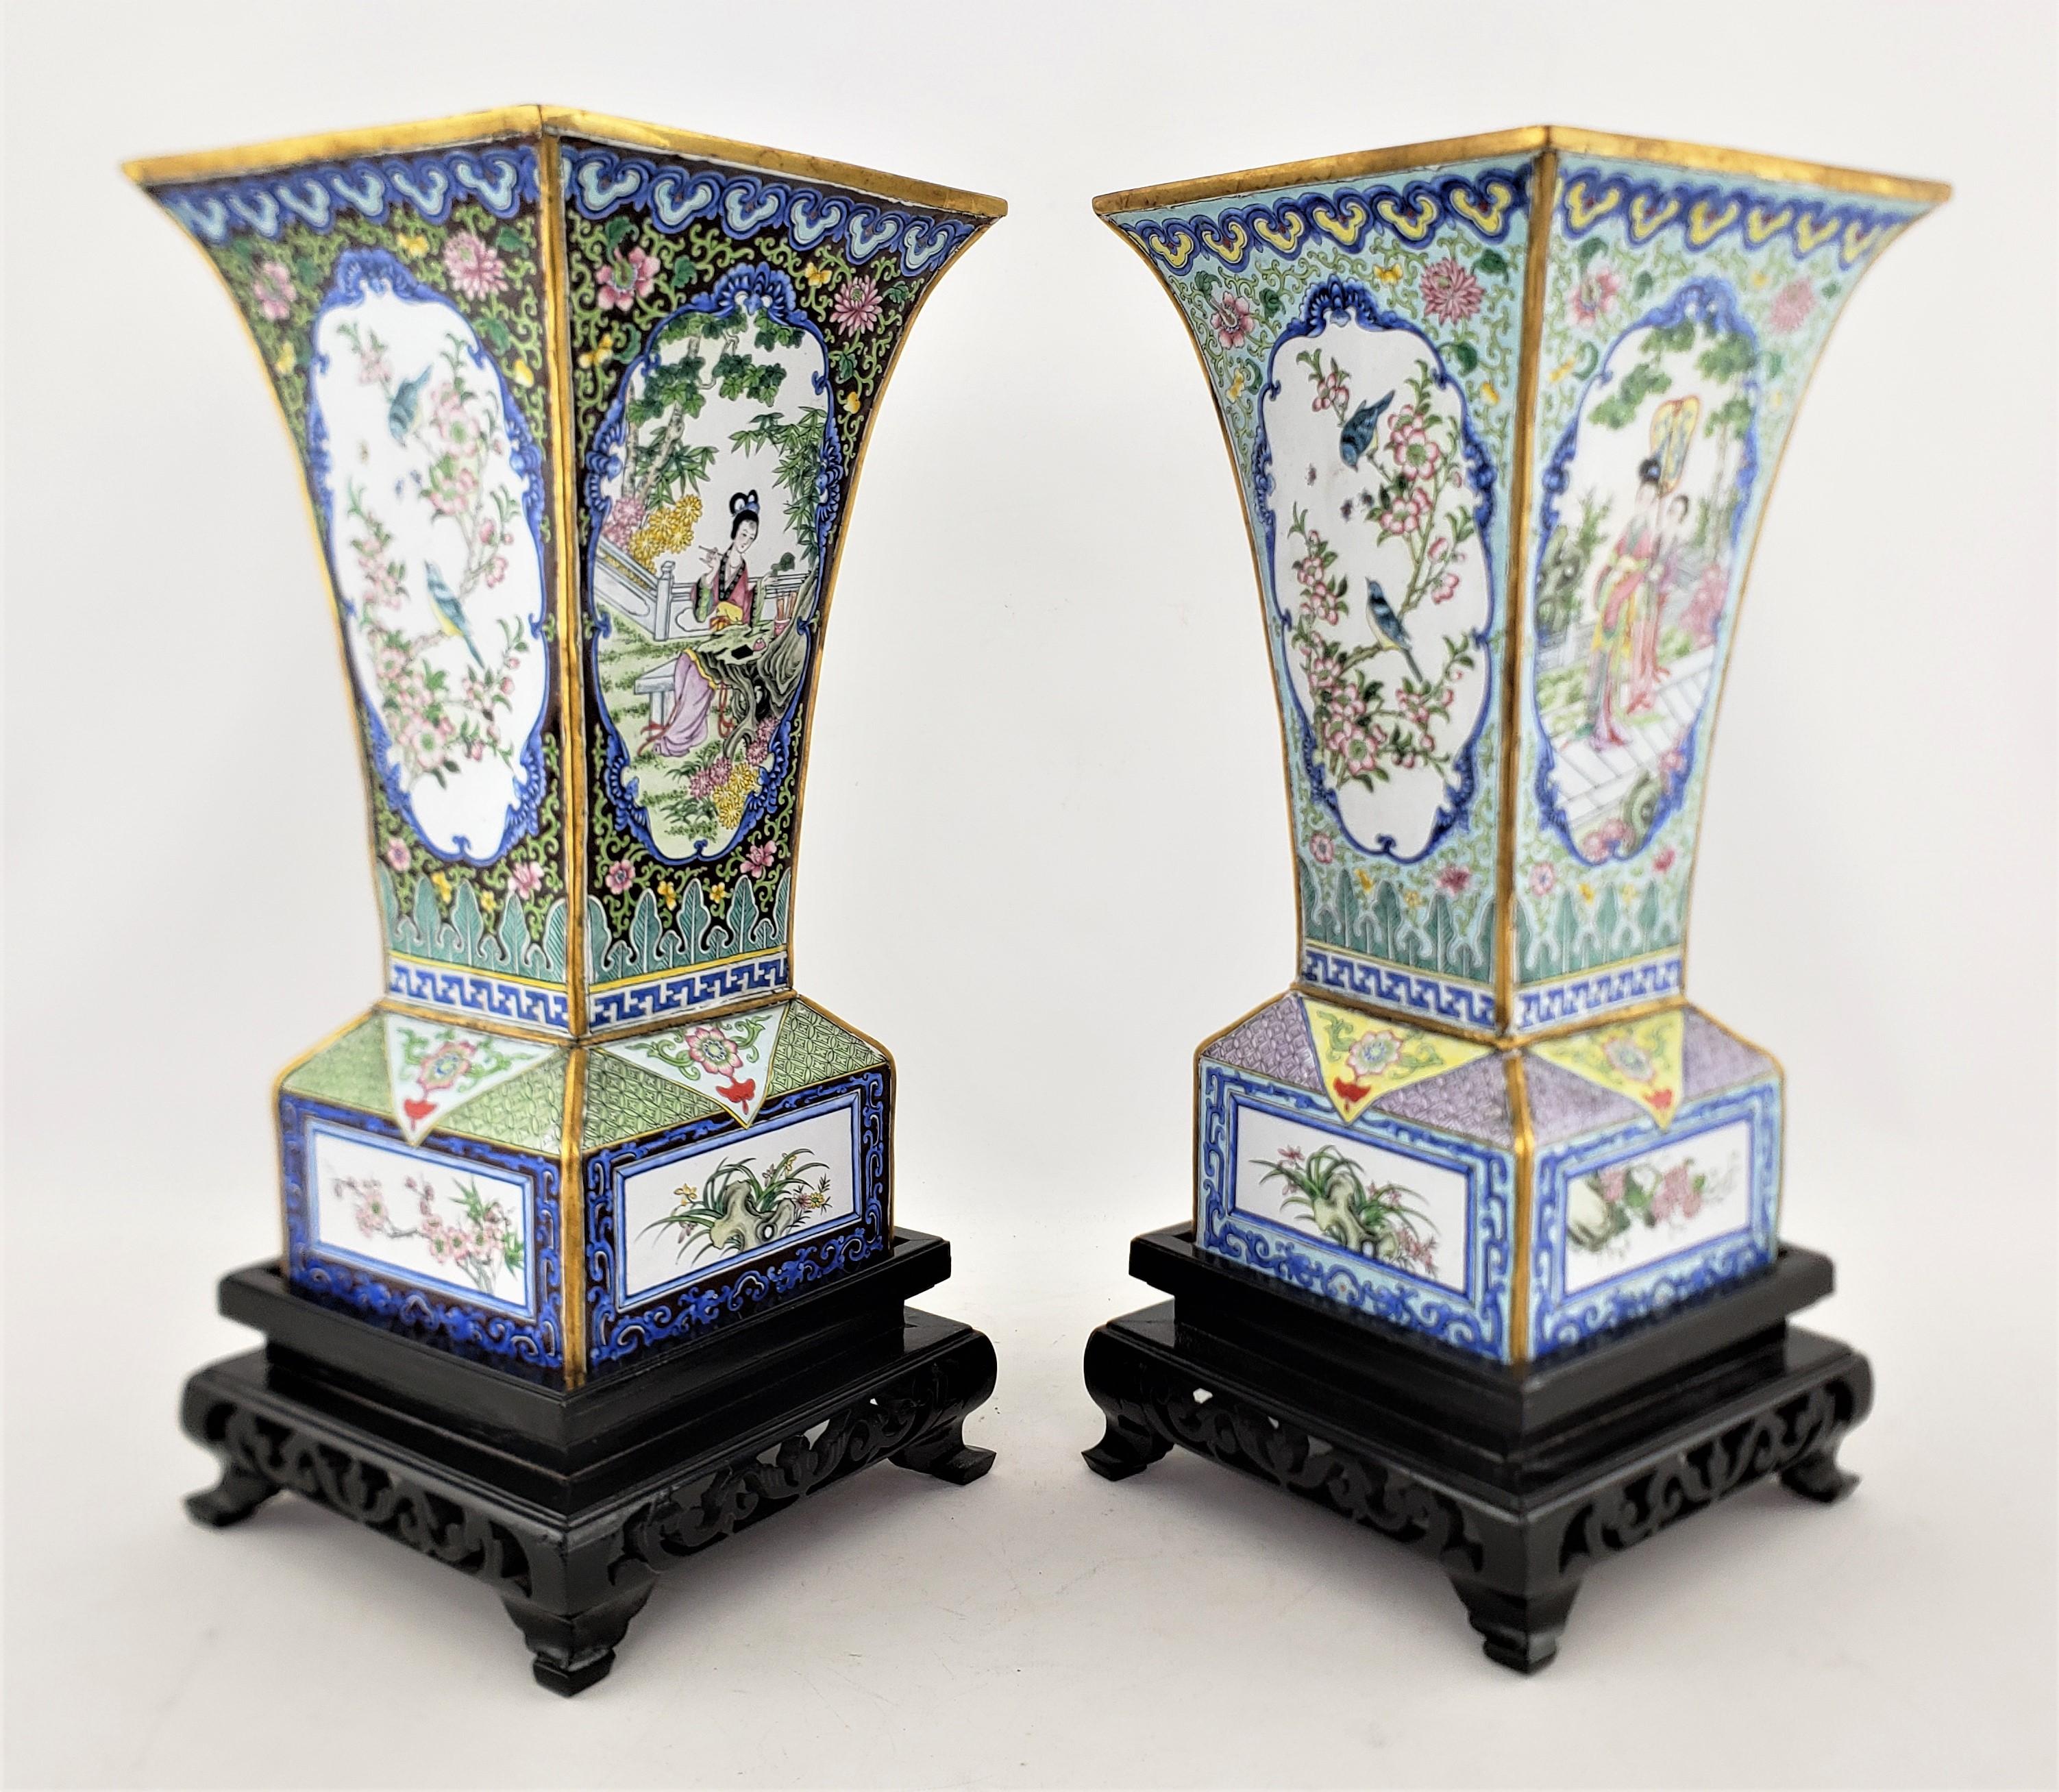 Pair of Mid 20th Century Enameled Copper Vases with Floral & Geisha Decoration In Good Condition For Sale In Hamilton, Ontario